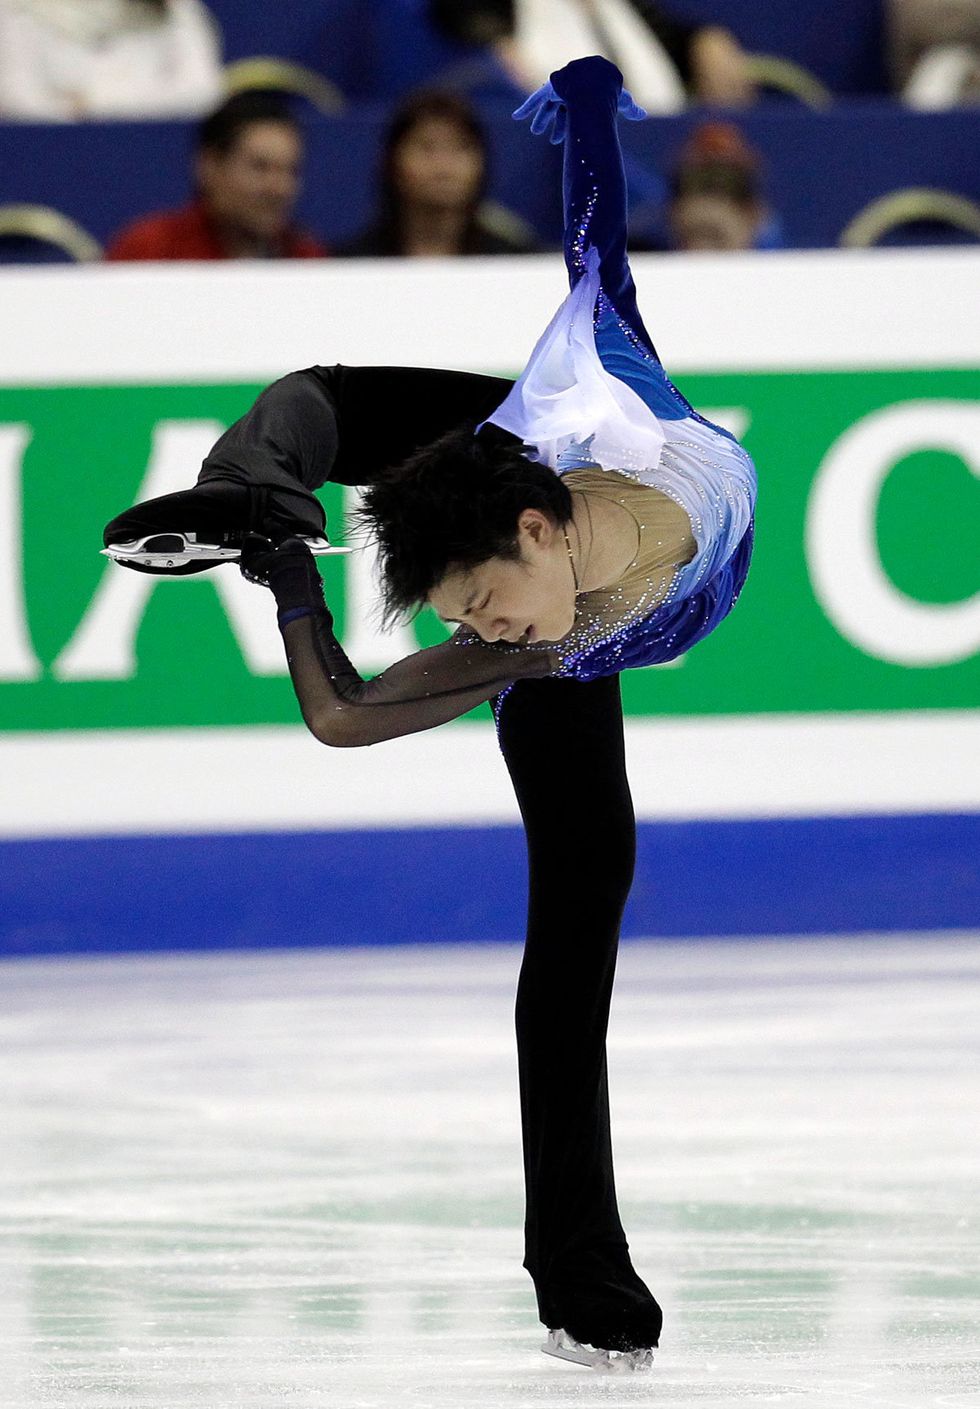 Human, Ice skate, Recreation, Ice rink, Sports, Logo, Competition event, Youth, Championship, Figure skate, 